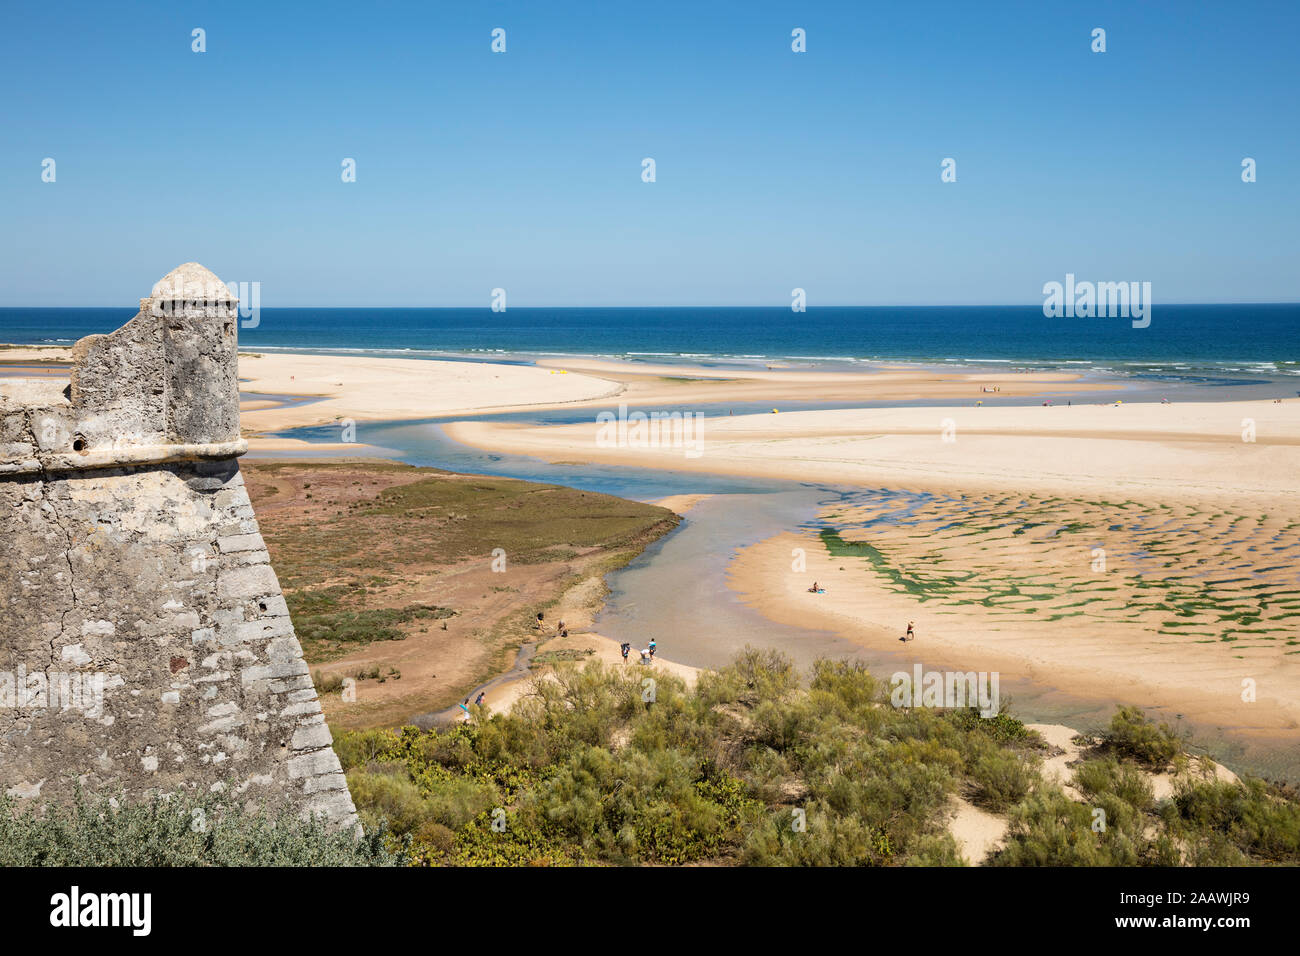 Scenic view of Ria Formosa against clear blue sky, Portugal Stock Photo